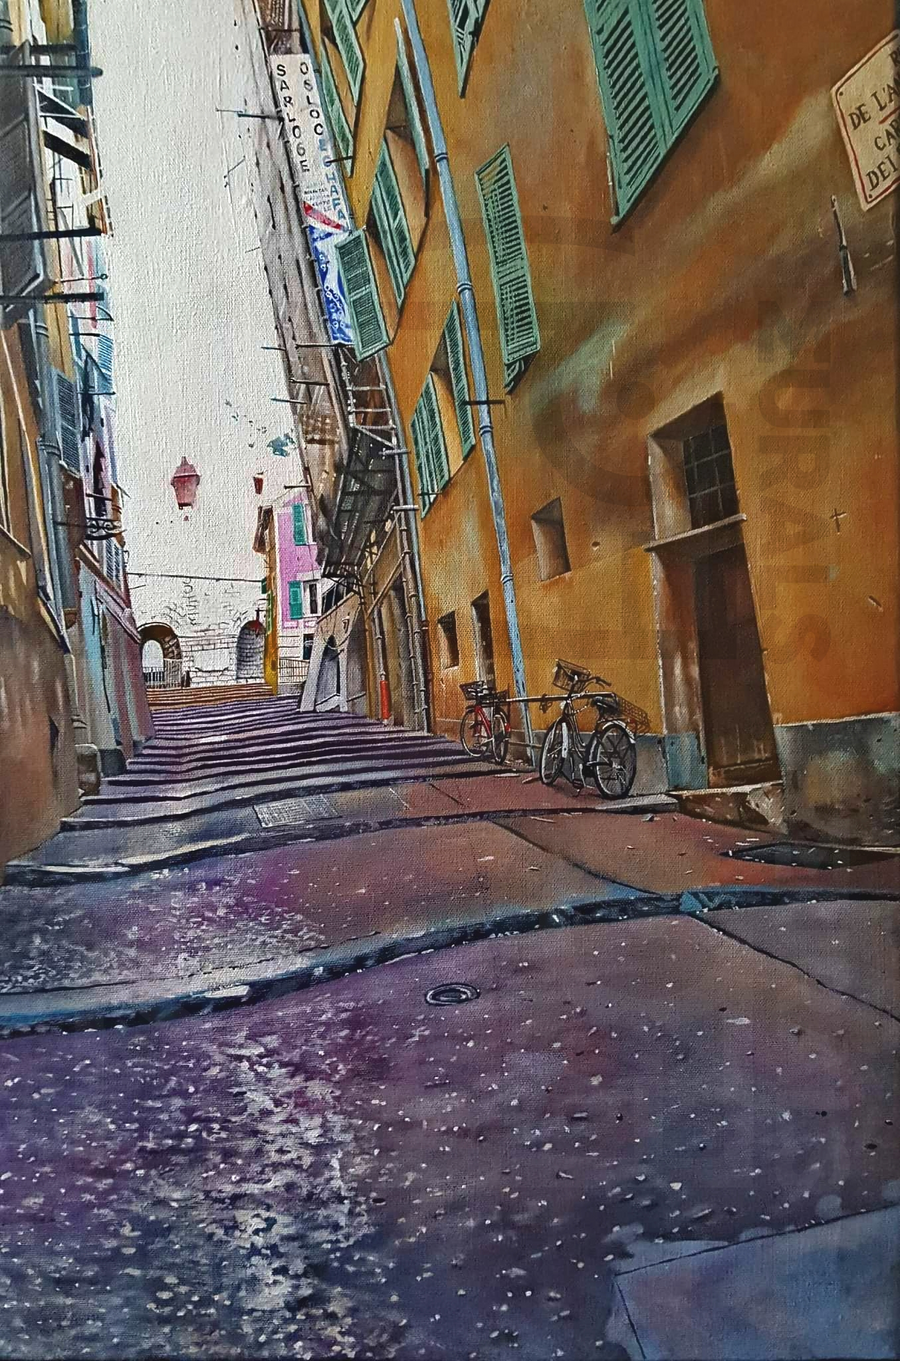 "The Streets in France"